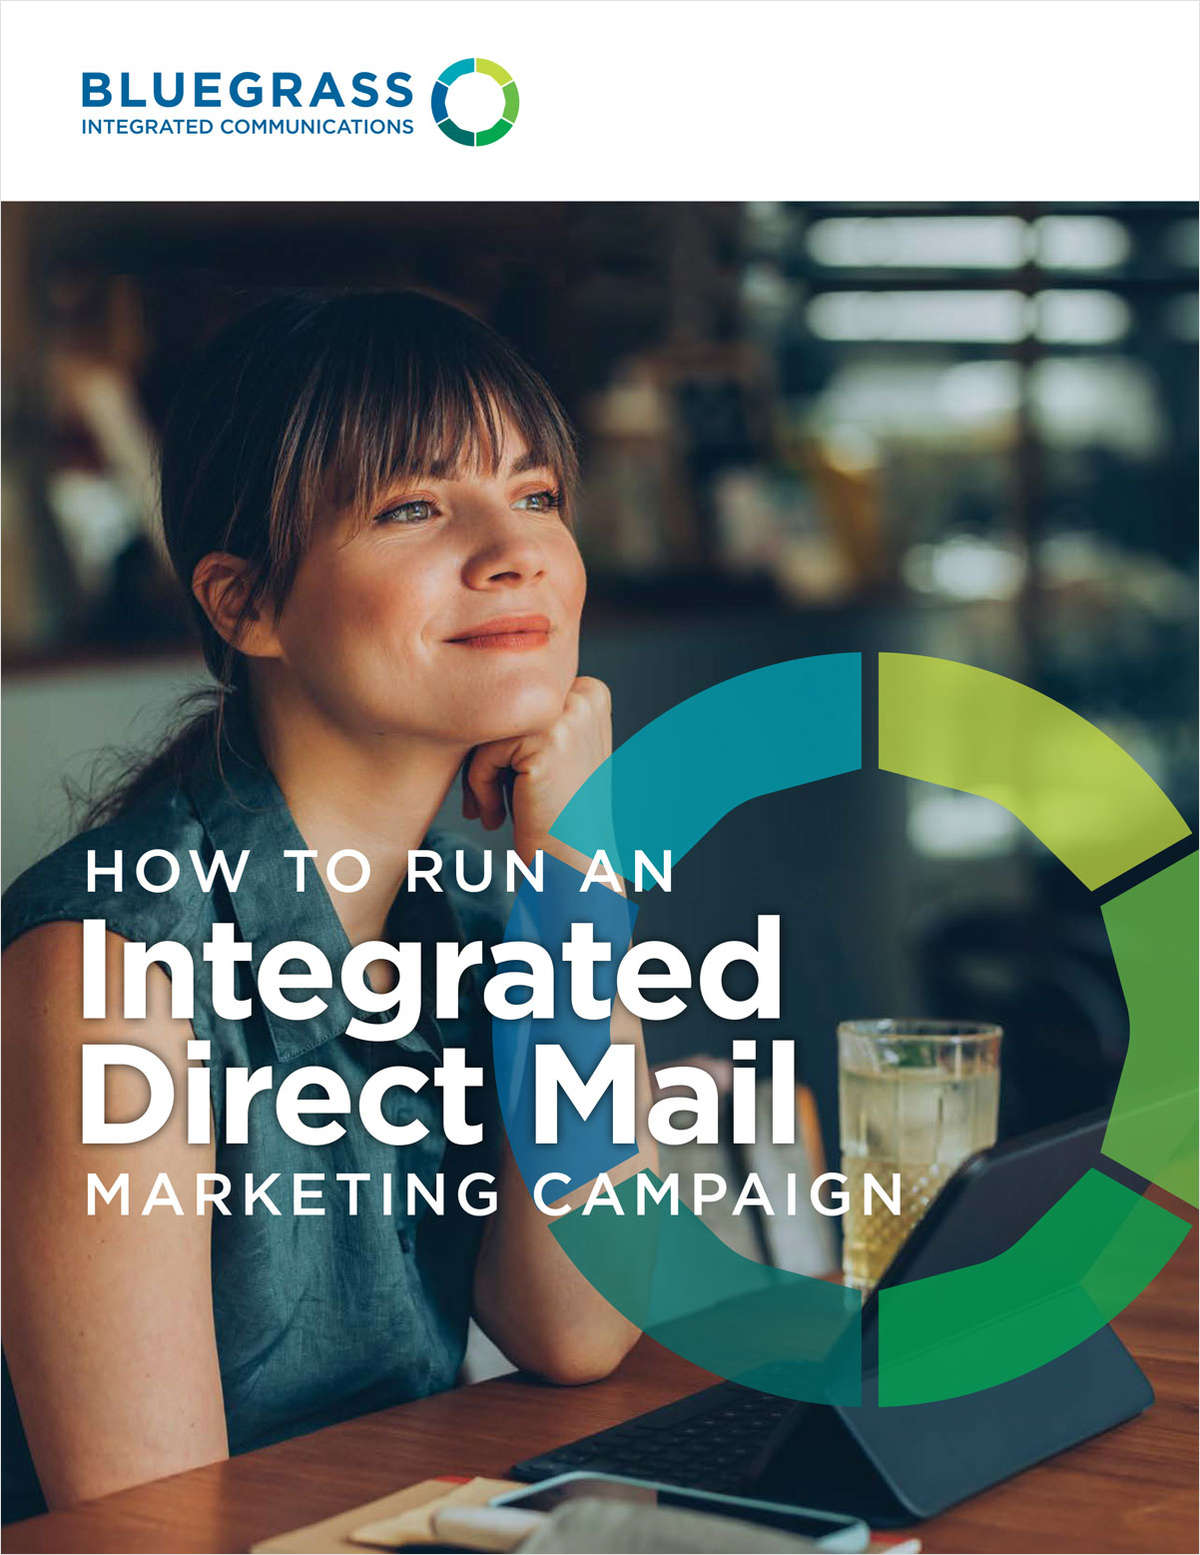 How to Run an Integrated Direct Mail Marketing Campaign